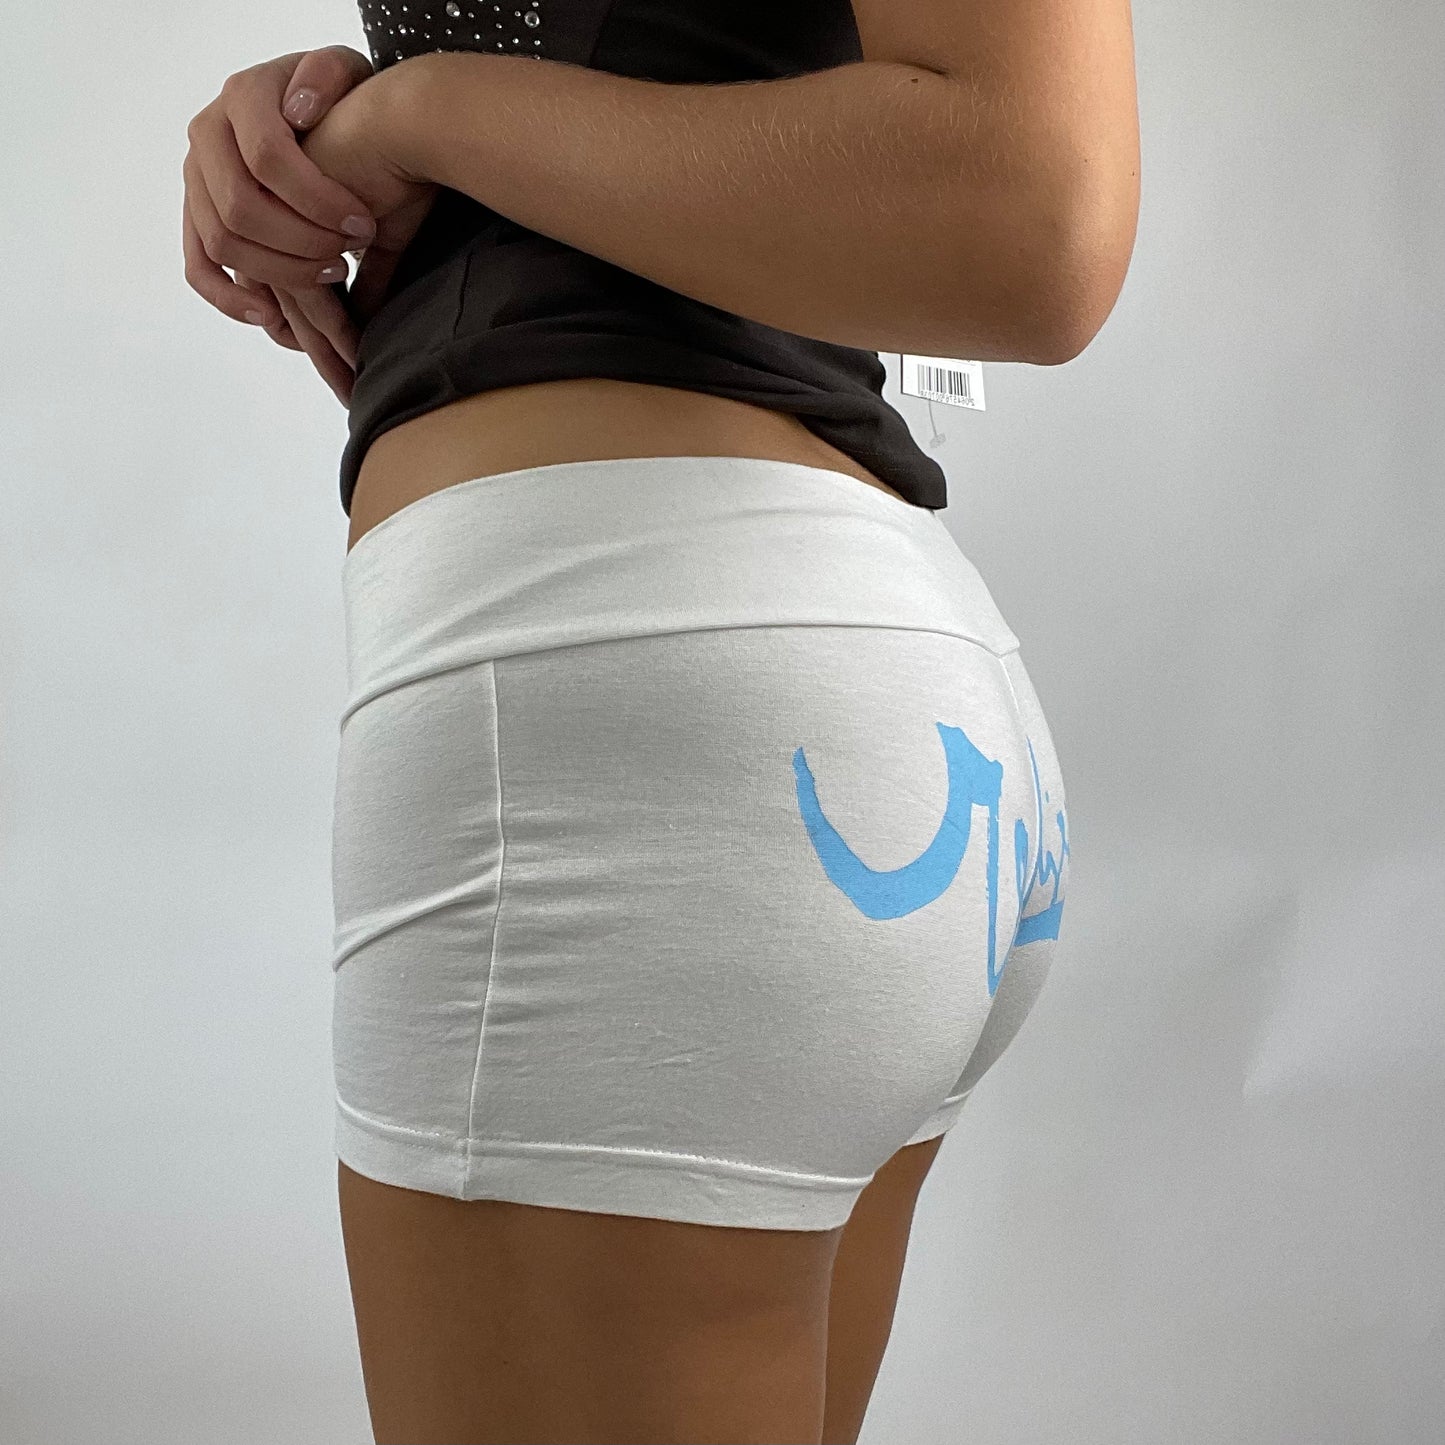 DROP 3 | quiksilver booty shorts - size small